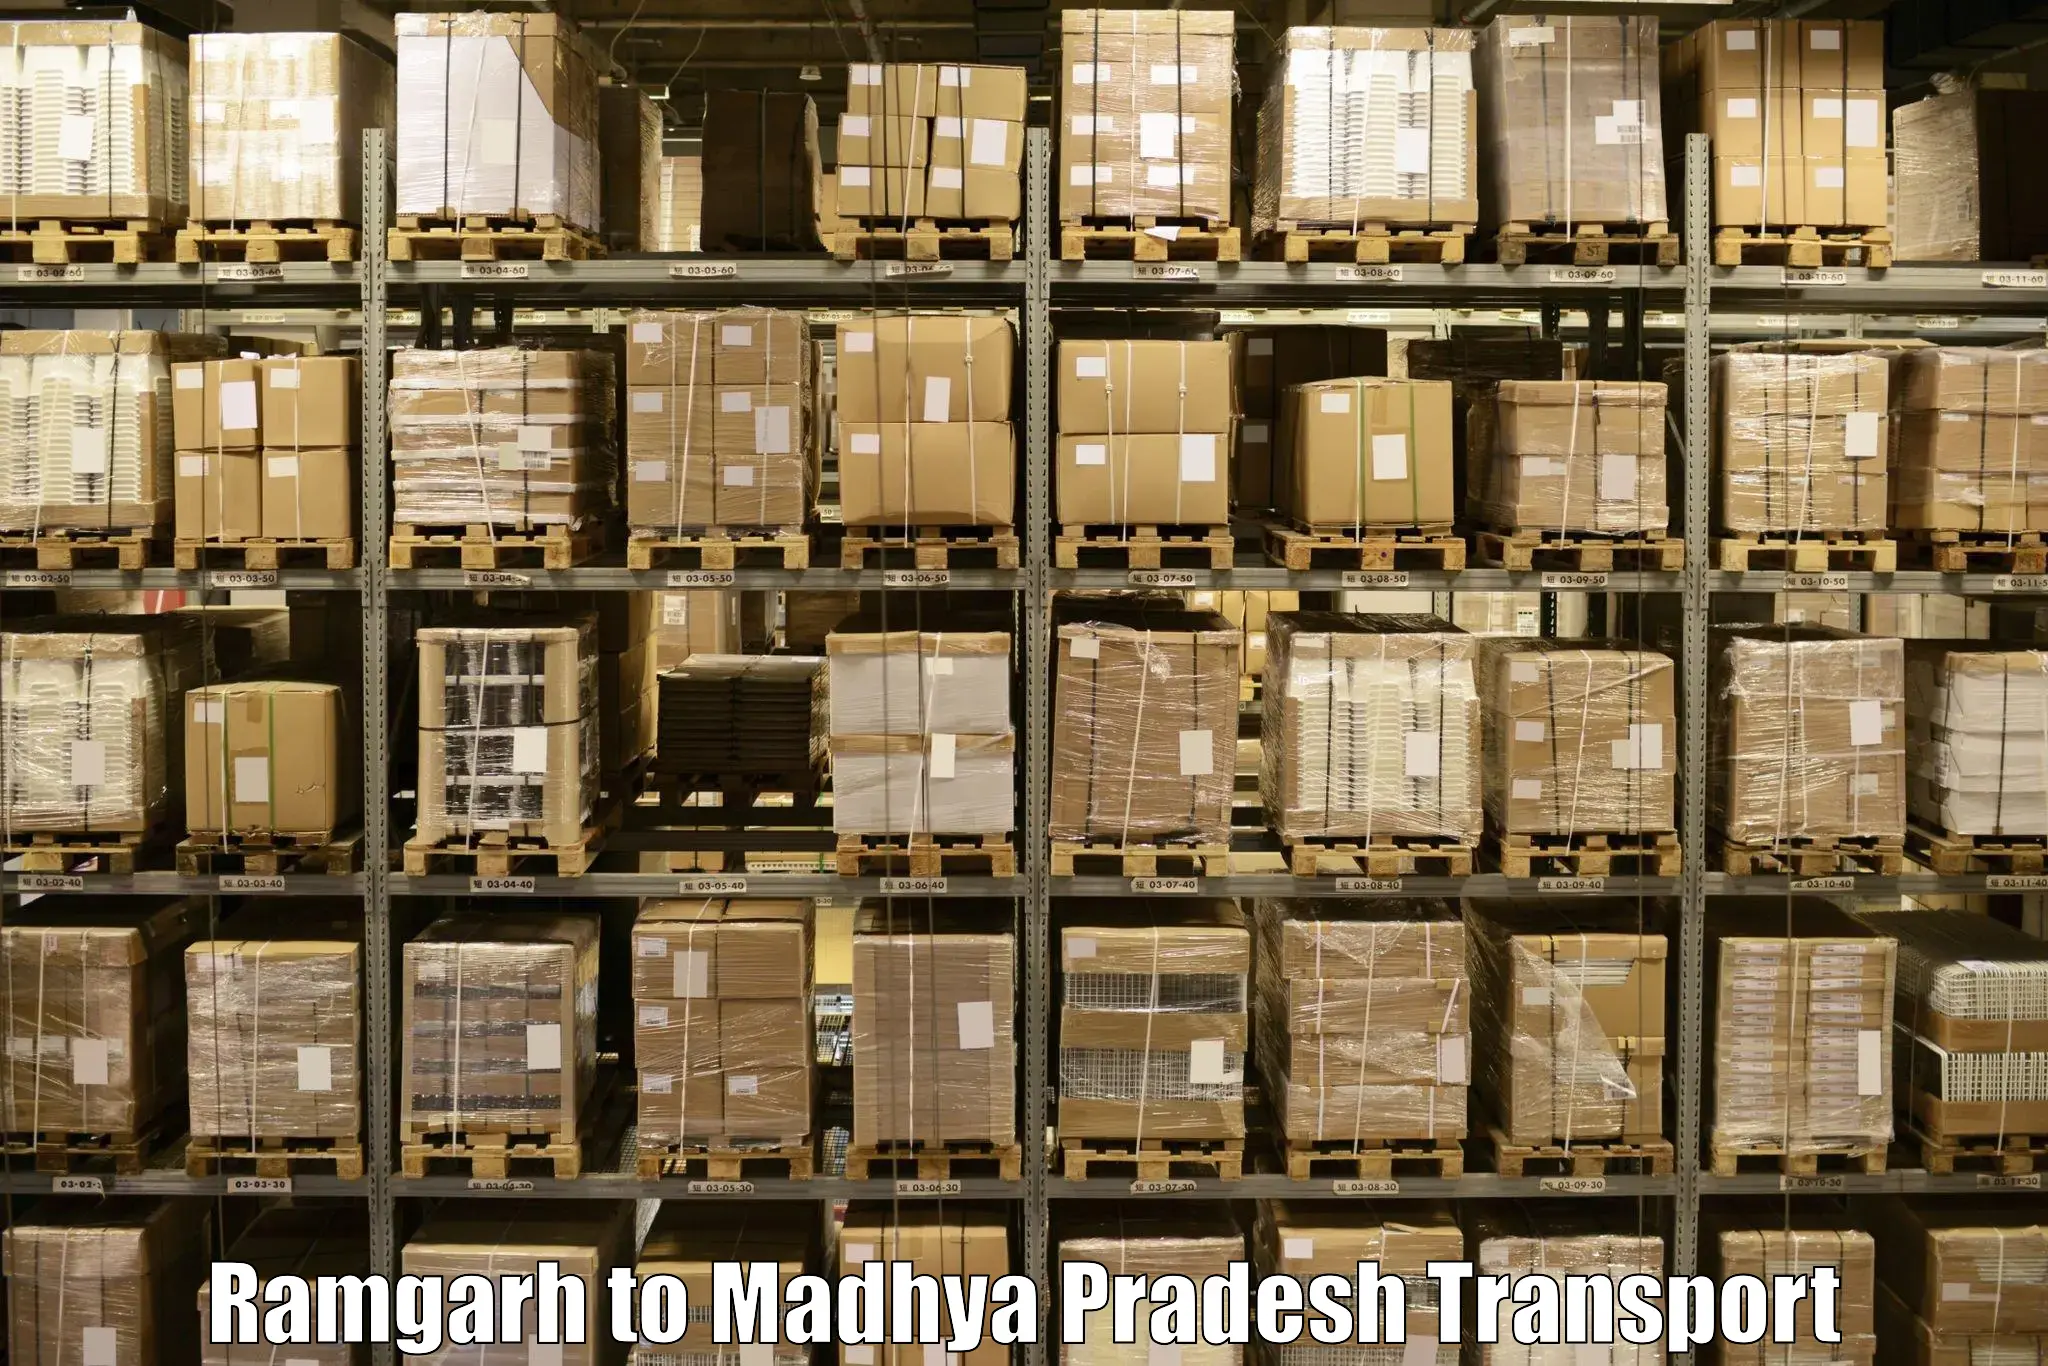 Furniture transport service in Ramgarh to Bhopal